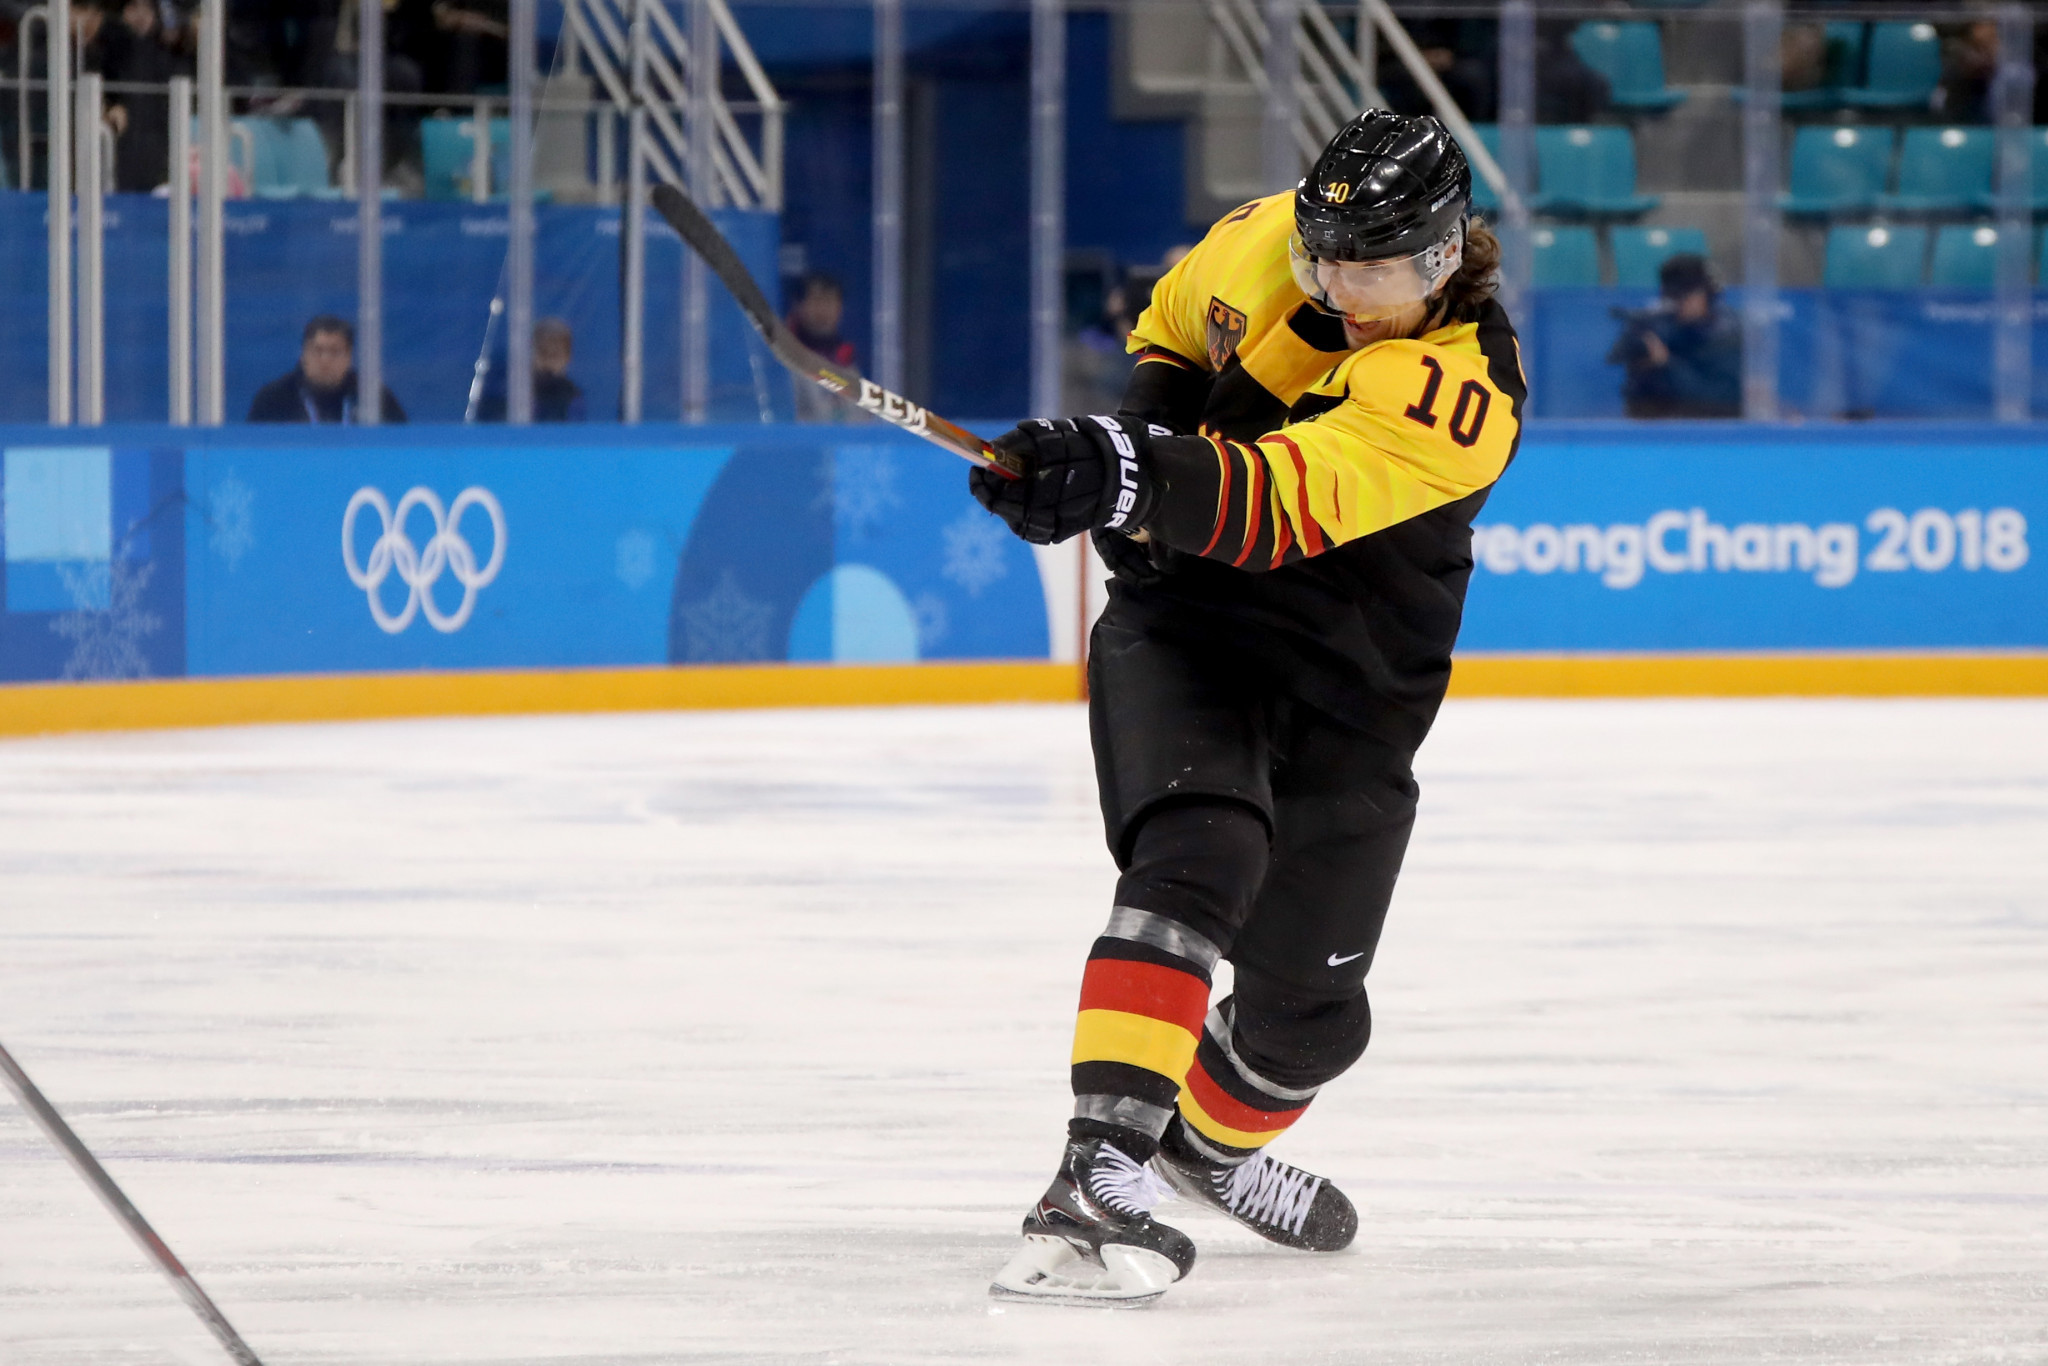 Christian Ehrhoff helped Germany to a surprise silver medal at Pyeongchang 2018 ©Getty Images